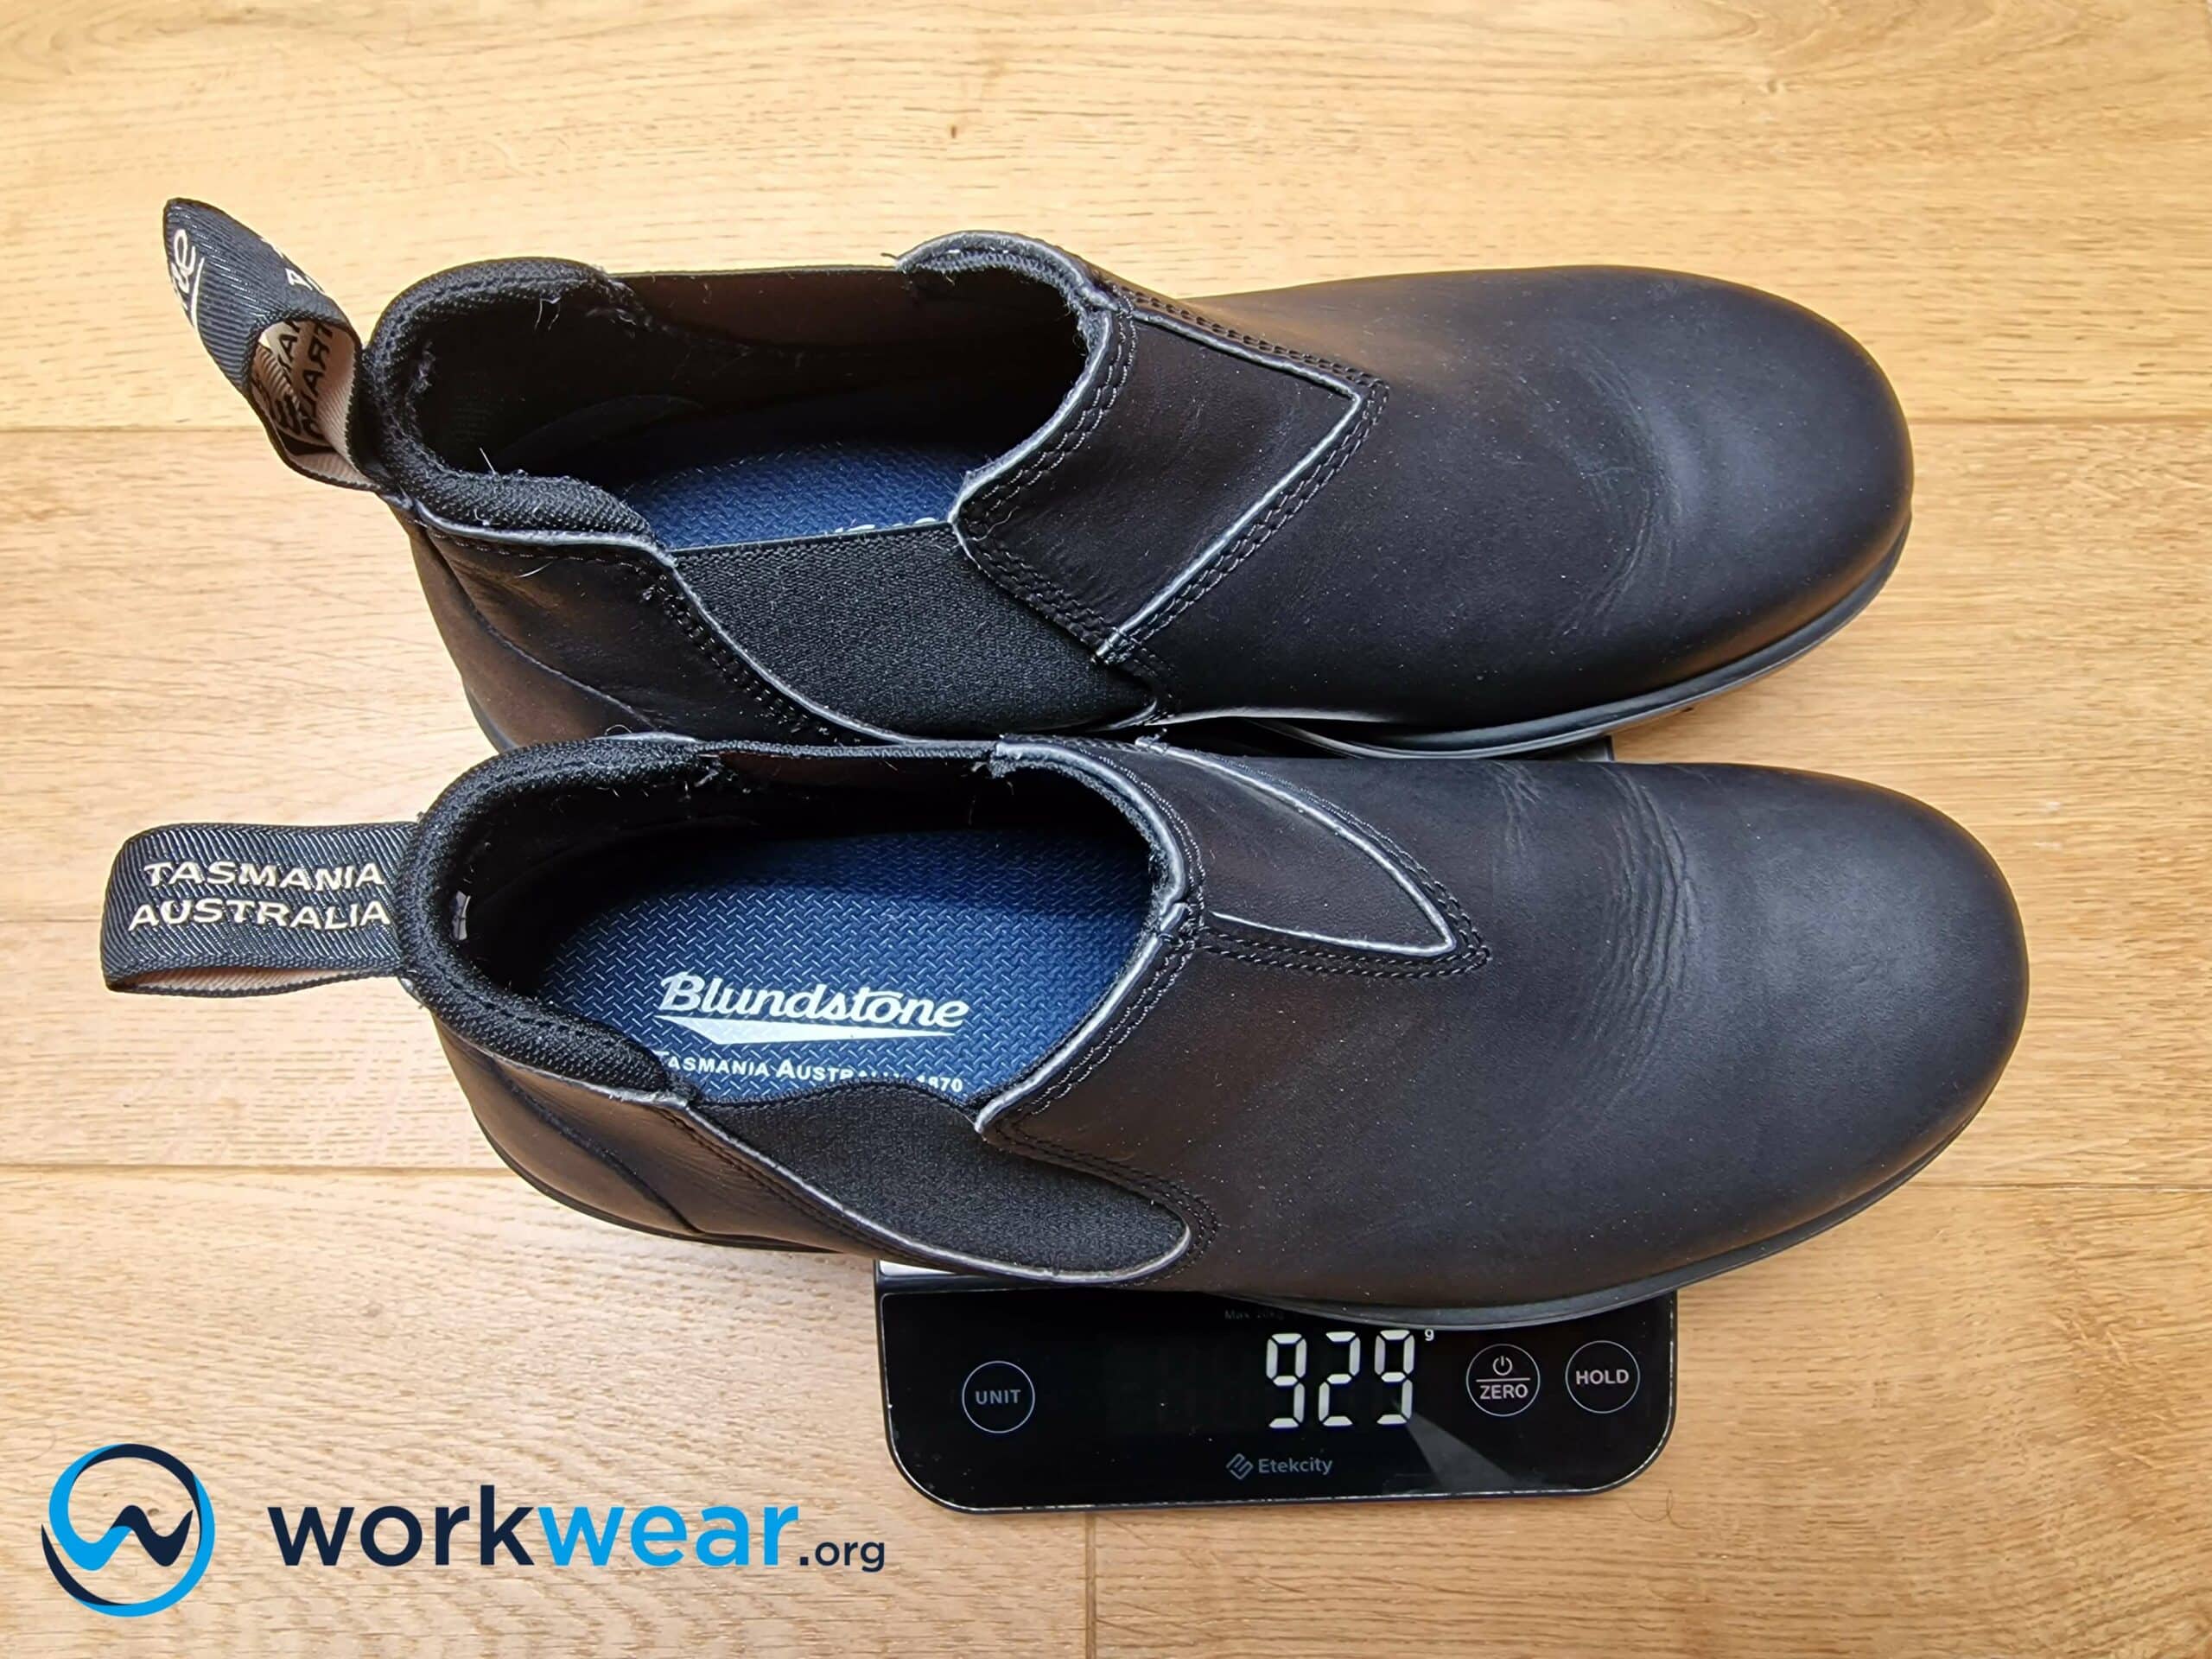 Blundstone 2039 Review - Worn, Tested & Evaluated | WorkWear.org